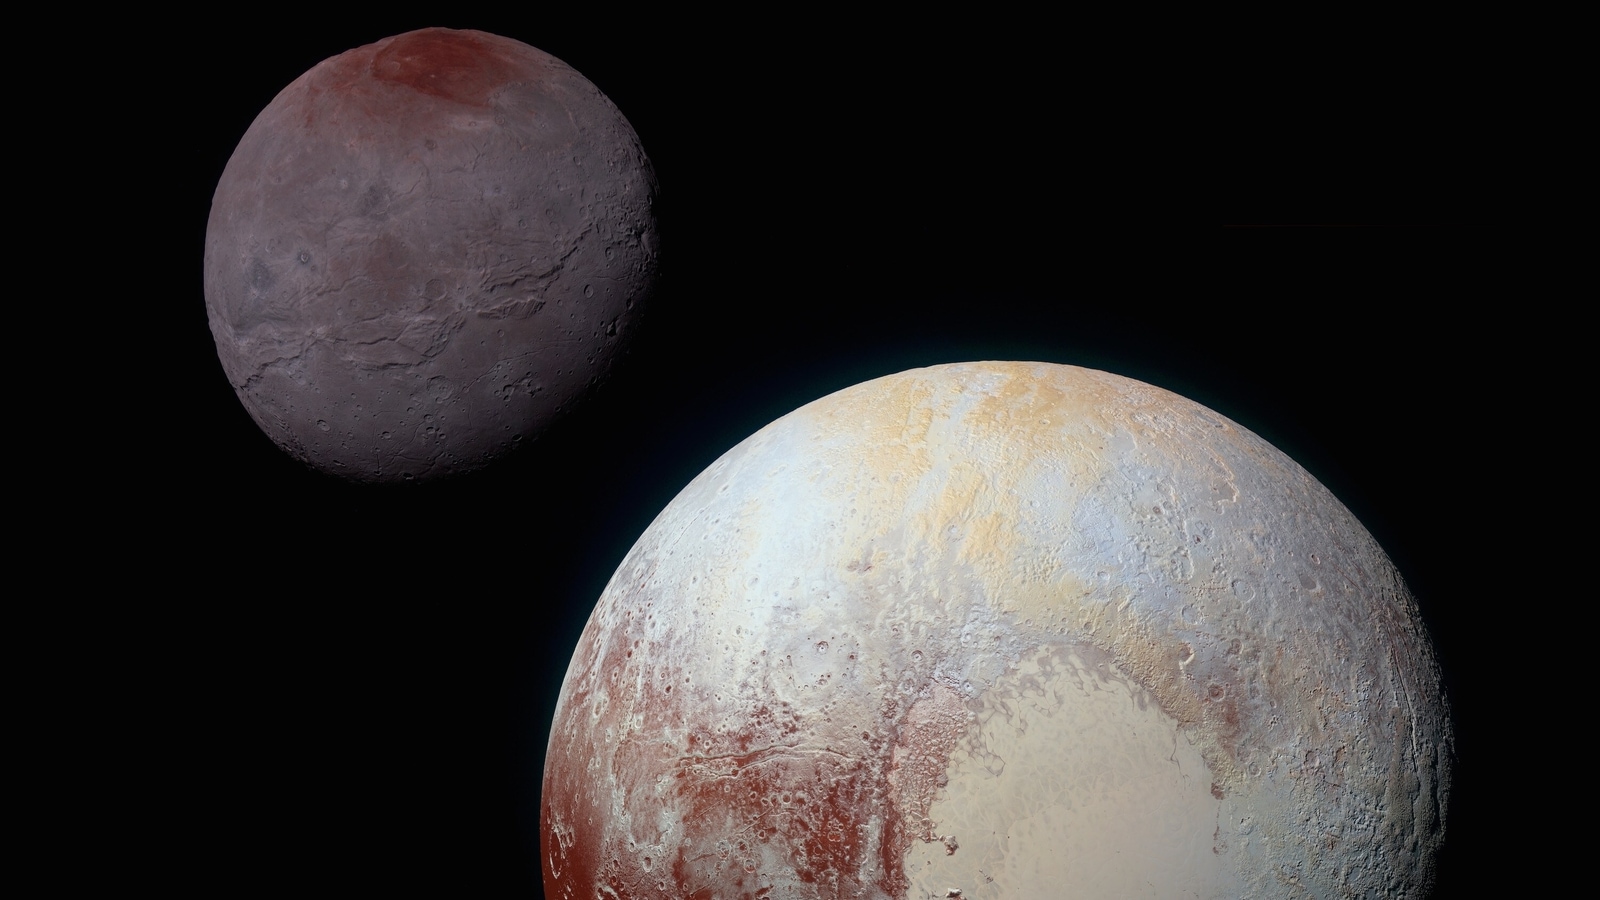 Revealed: How Pluto turned into a dwarf planet?